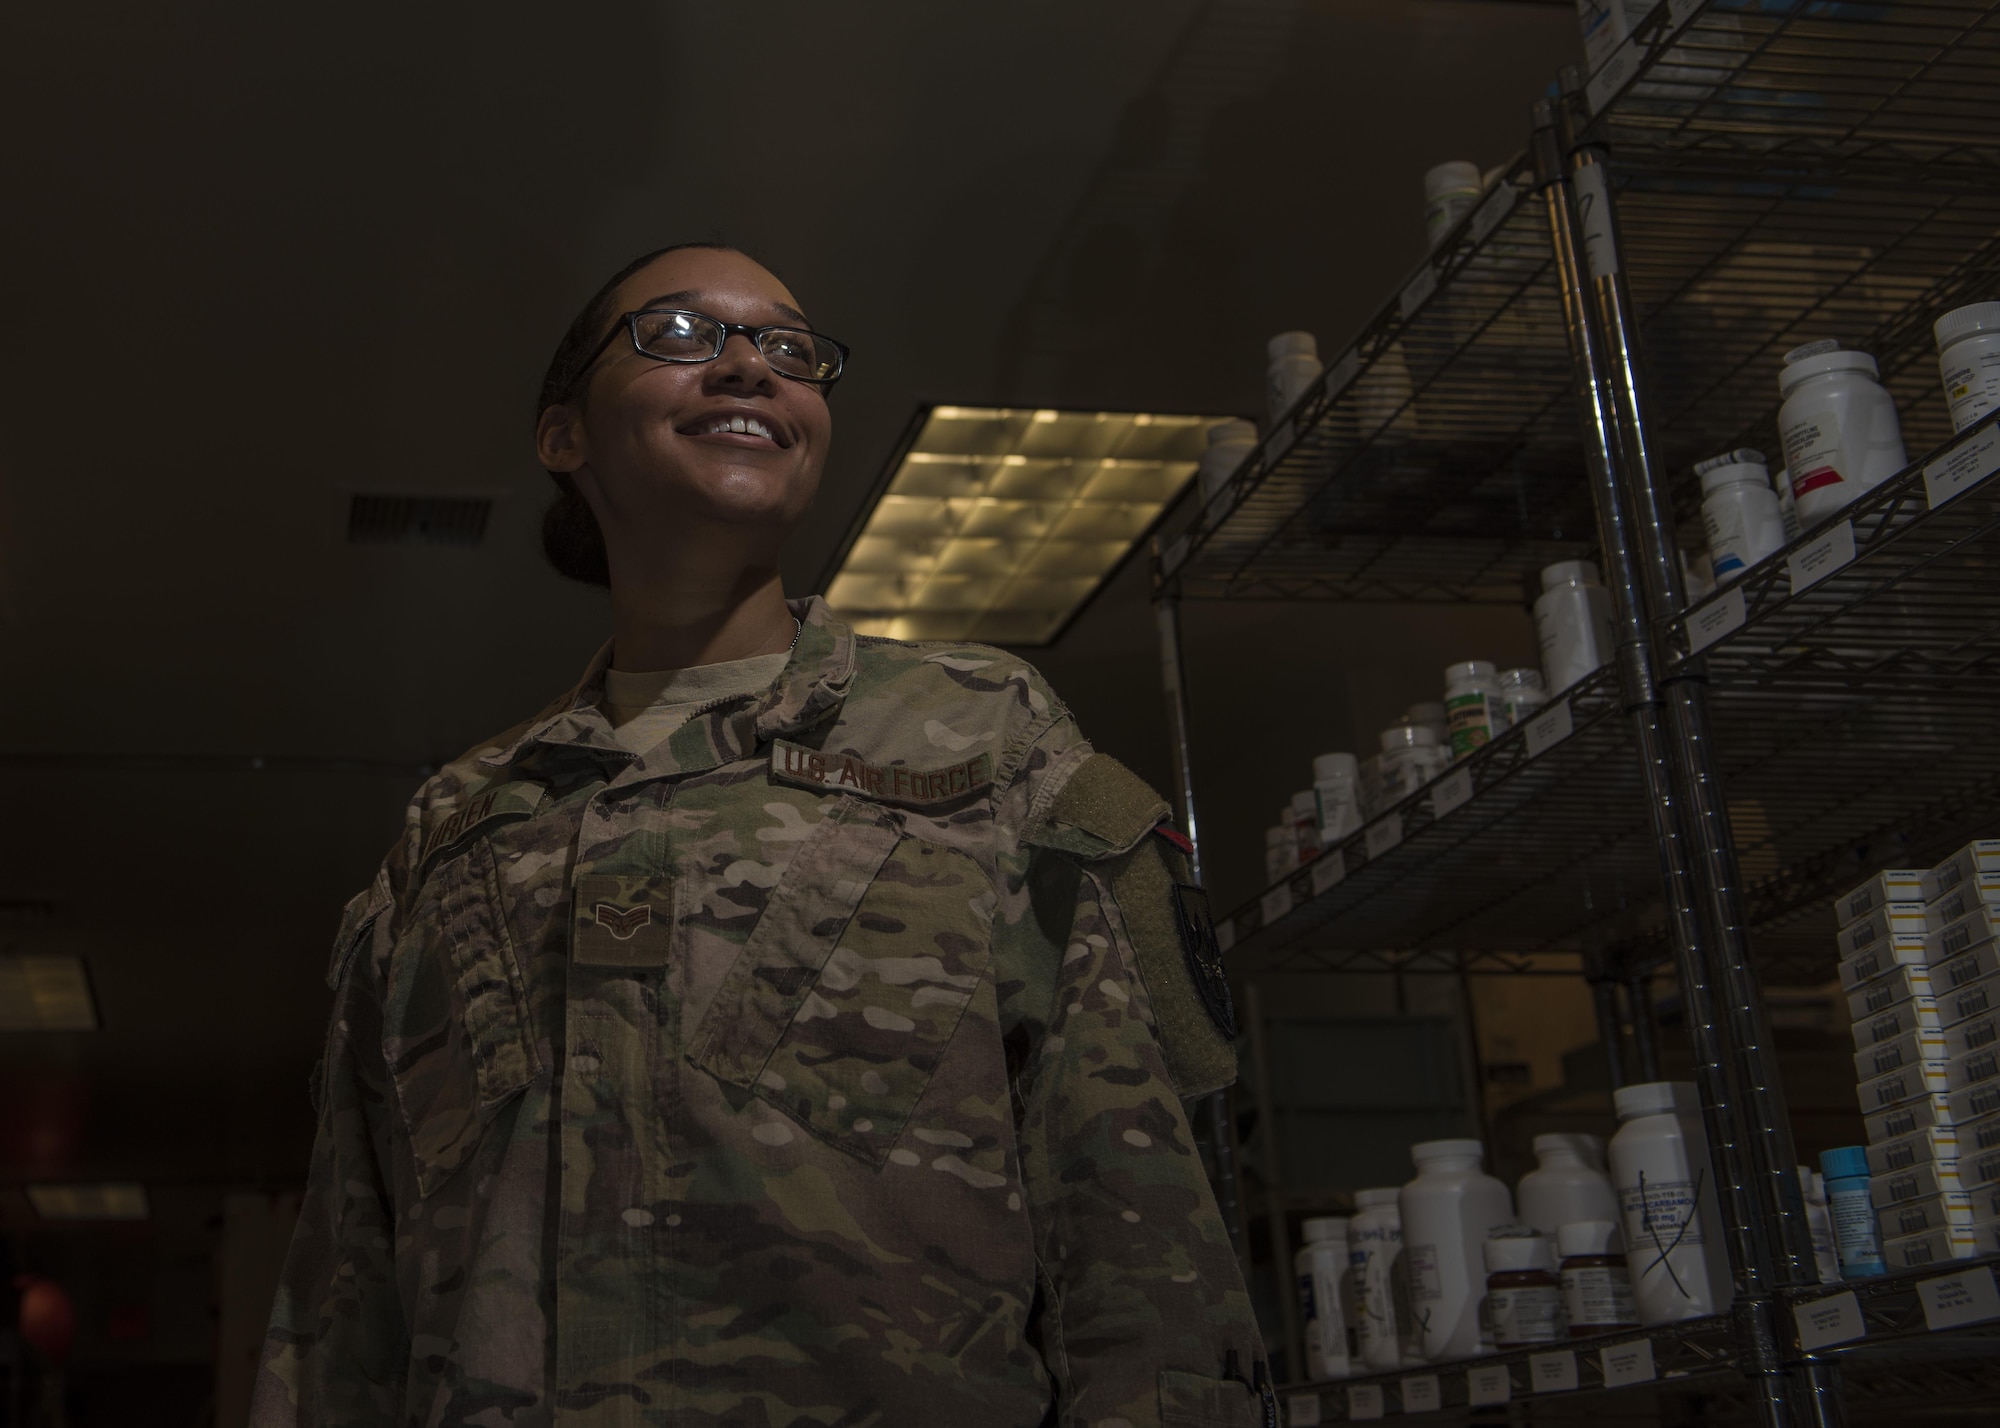 Senior Airman Latoya Kirven, 455th Expeditionary Medical Group pharmacy technician, poses for a portrait at the Craig Joint-Theater Hospital, Bagram Airfield, Afghanistan, June 06, 2016. Airmen of the 455th EMDG pharmacy have made 621 IVs, filled 1,487 prescriptions, and compounded 9,119 doses for patients within the past month. (U.S. Air Force photo by Senior Airman Justyn M. Freeman